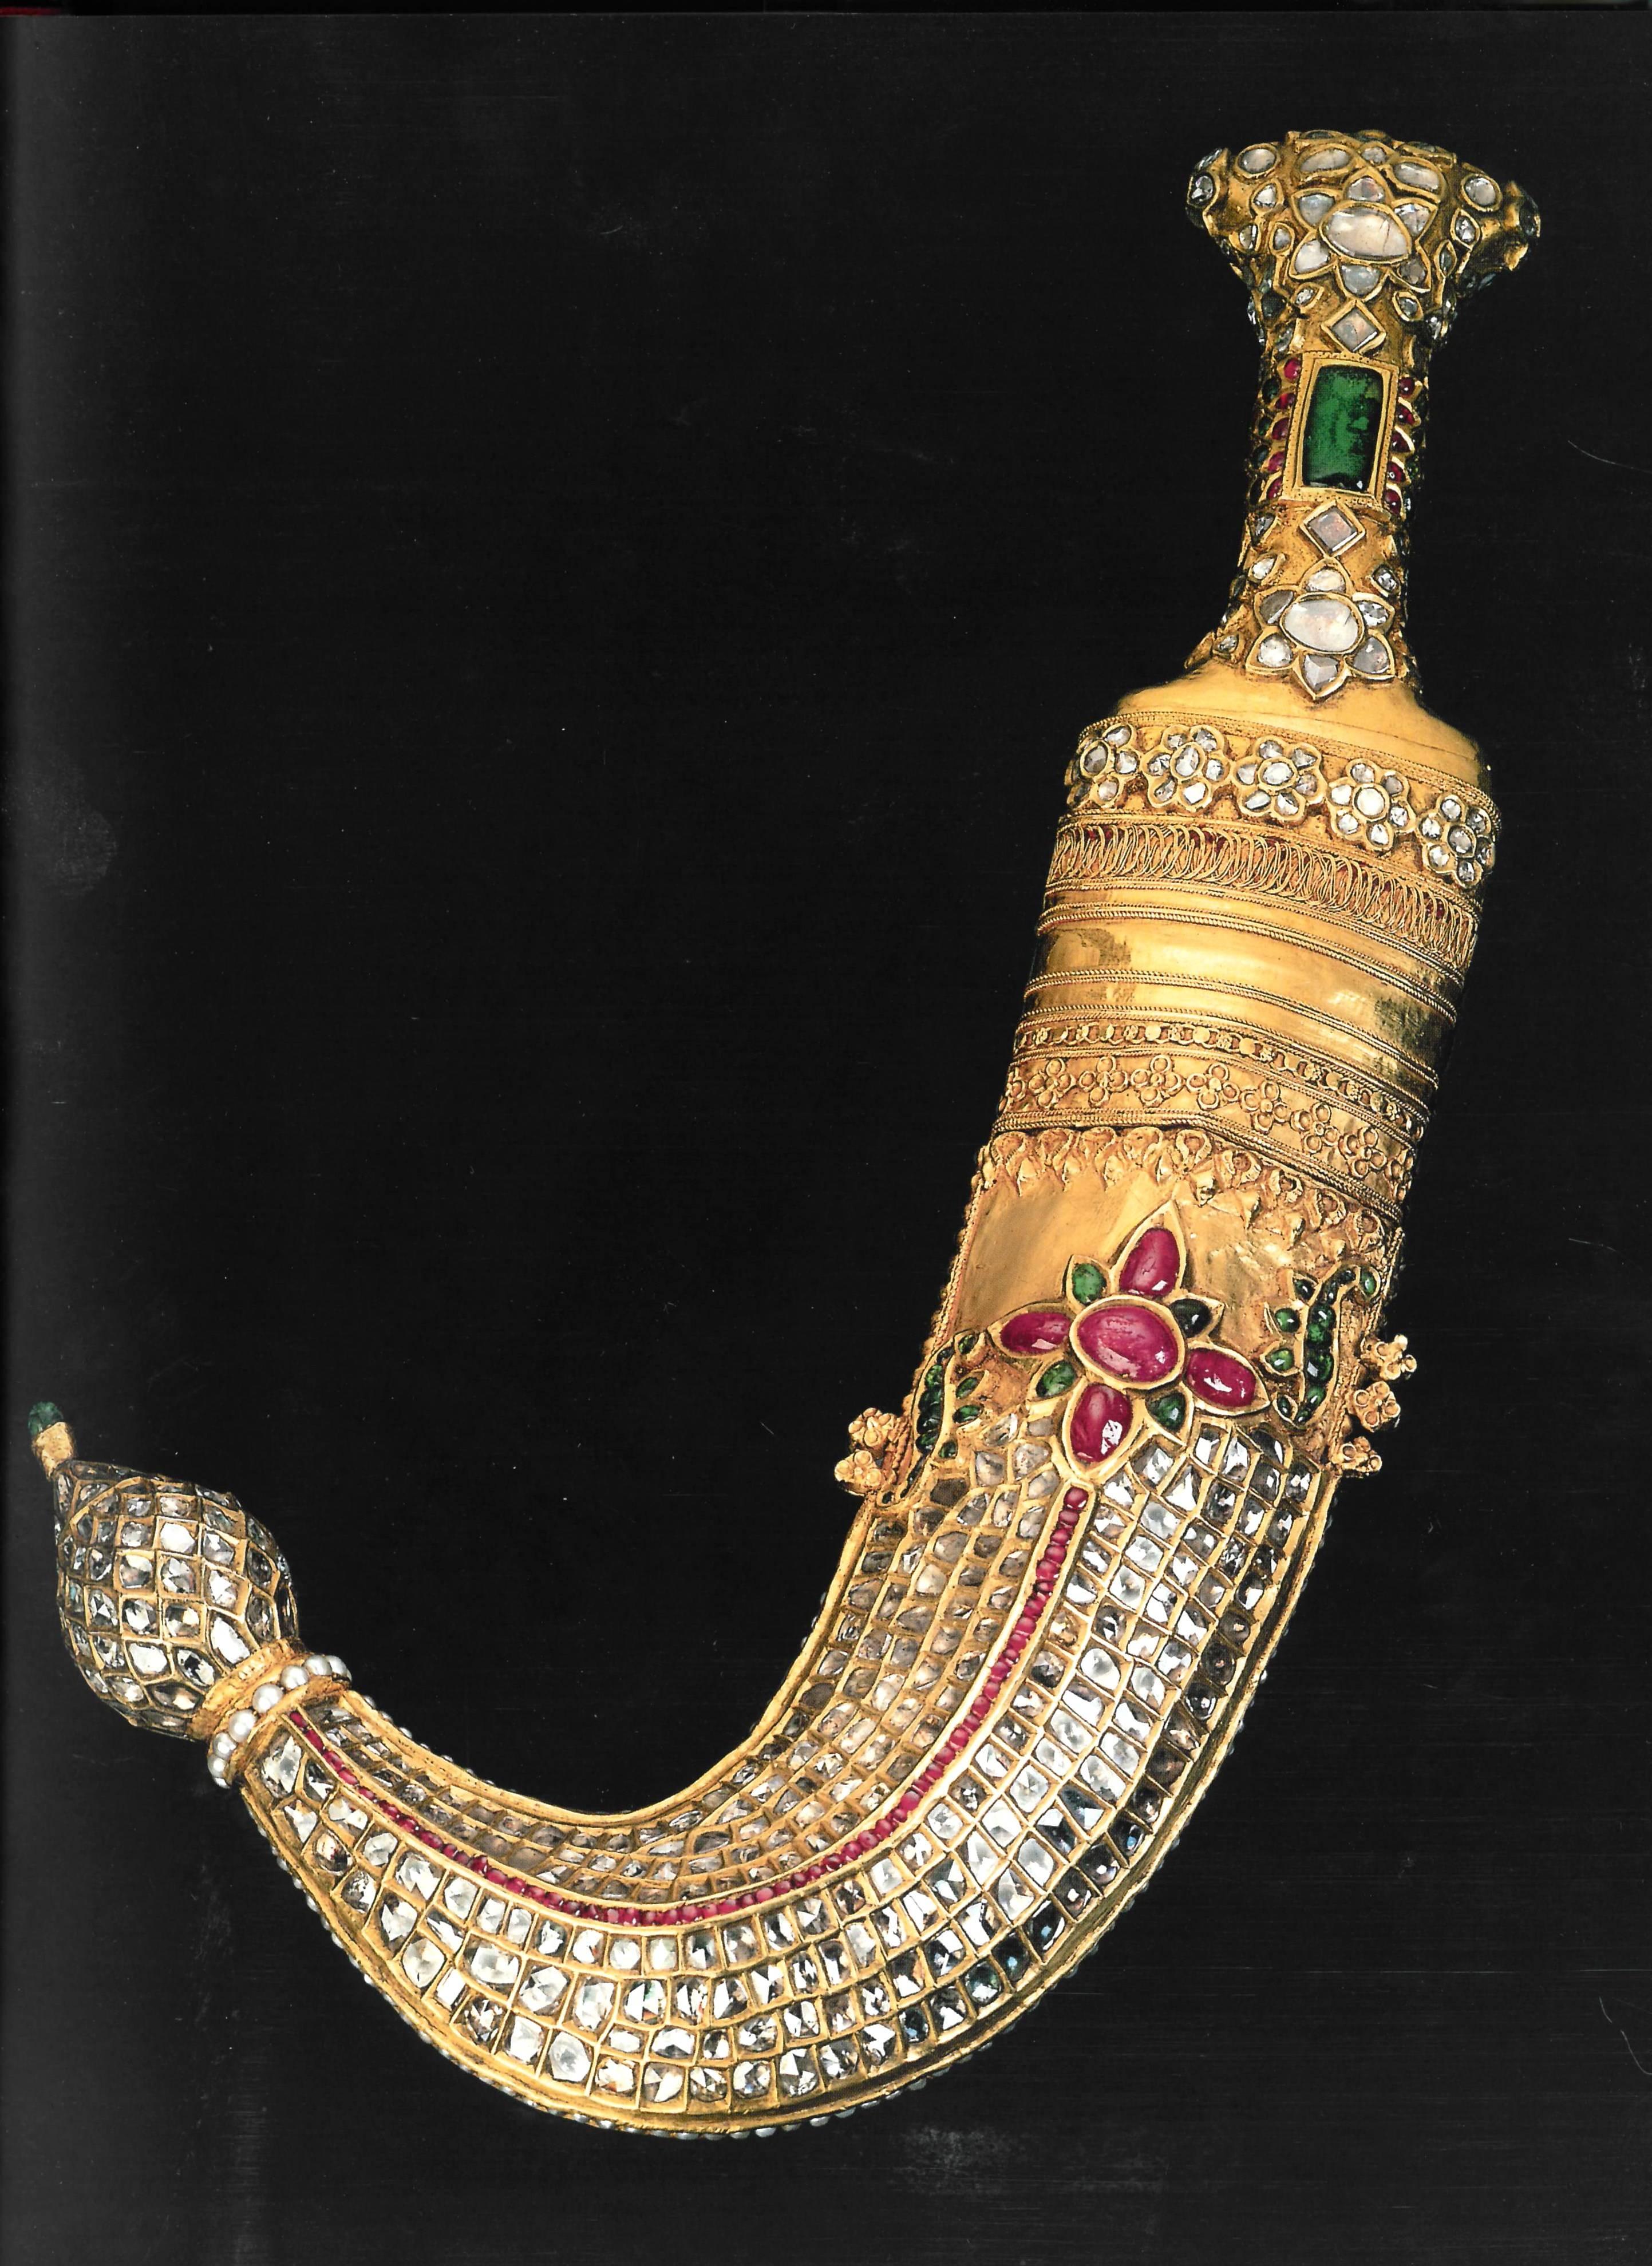 The core of this lavishly photographed book is the encounter between Indian princely magnificence and the best of European Jewellery designers in the 20th century when many of the Maharaja's travelled to Europe with trunks filled with traditional